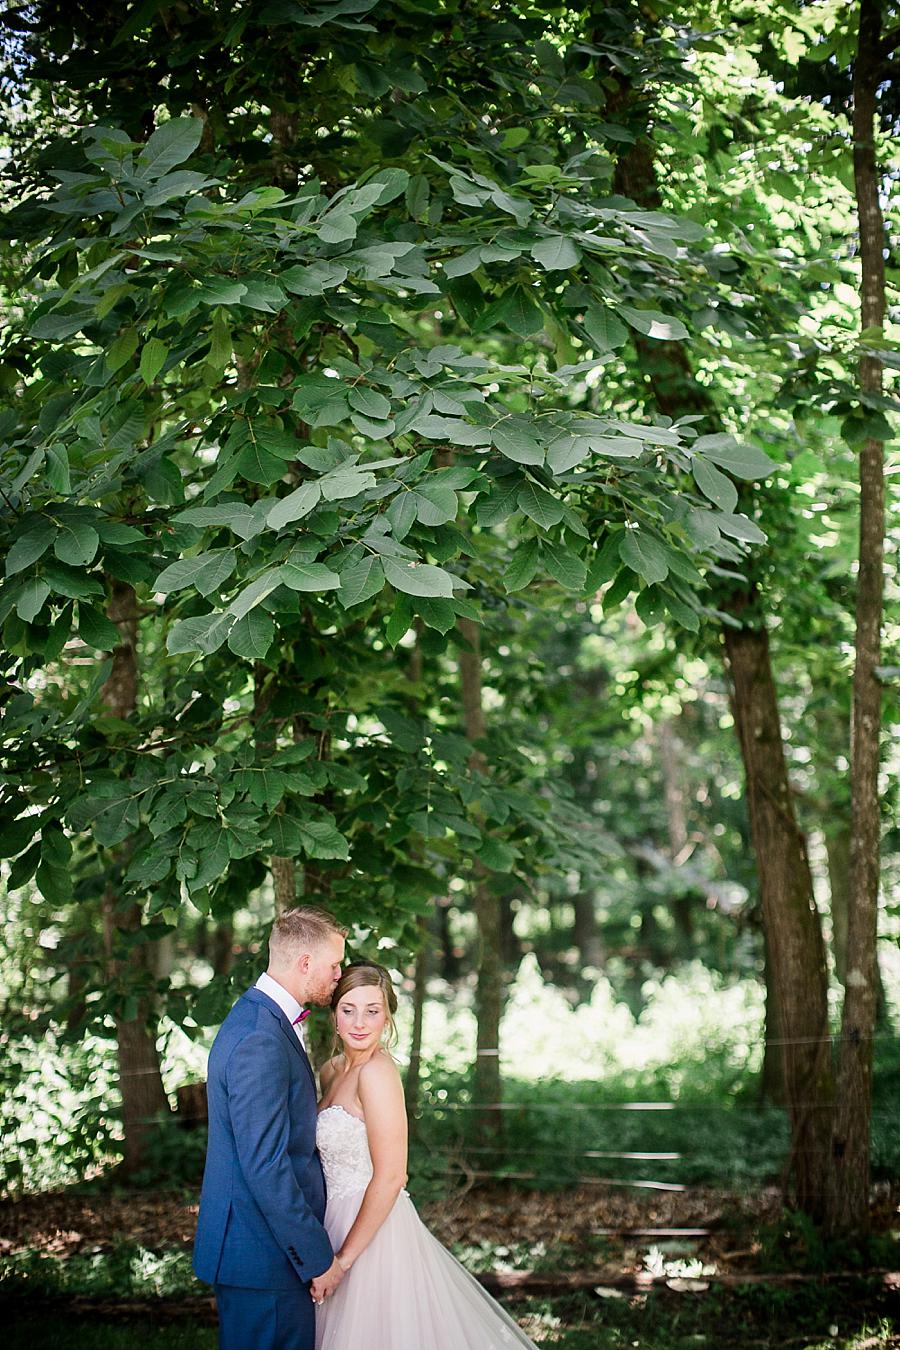 Kissing the side of her head at this RiverView Family Farm Wedding by Knoxville Wedding Photographer, Amanda May Photos.